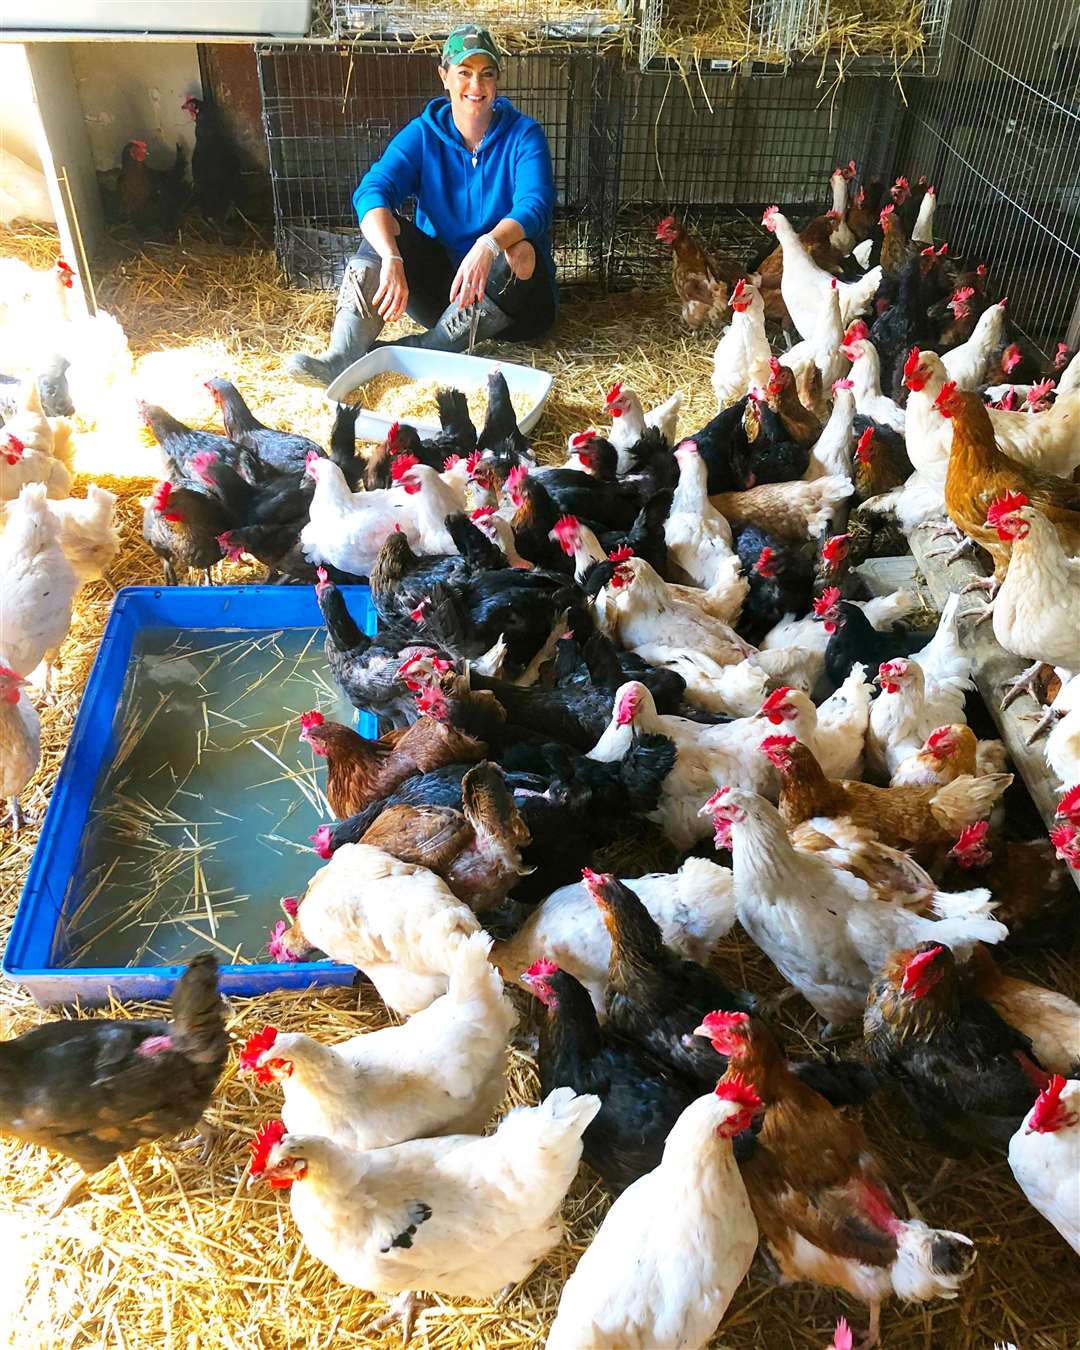 Happy Pants Ranch founder Amey James, with rescued hens among older chickens she already had